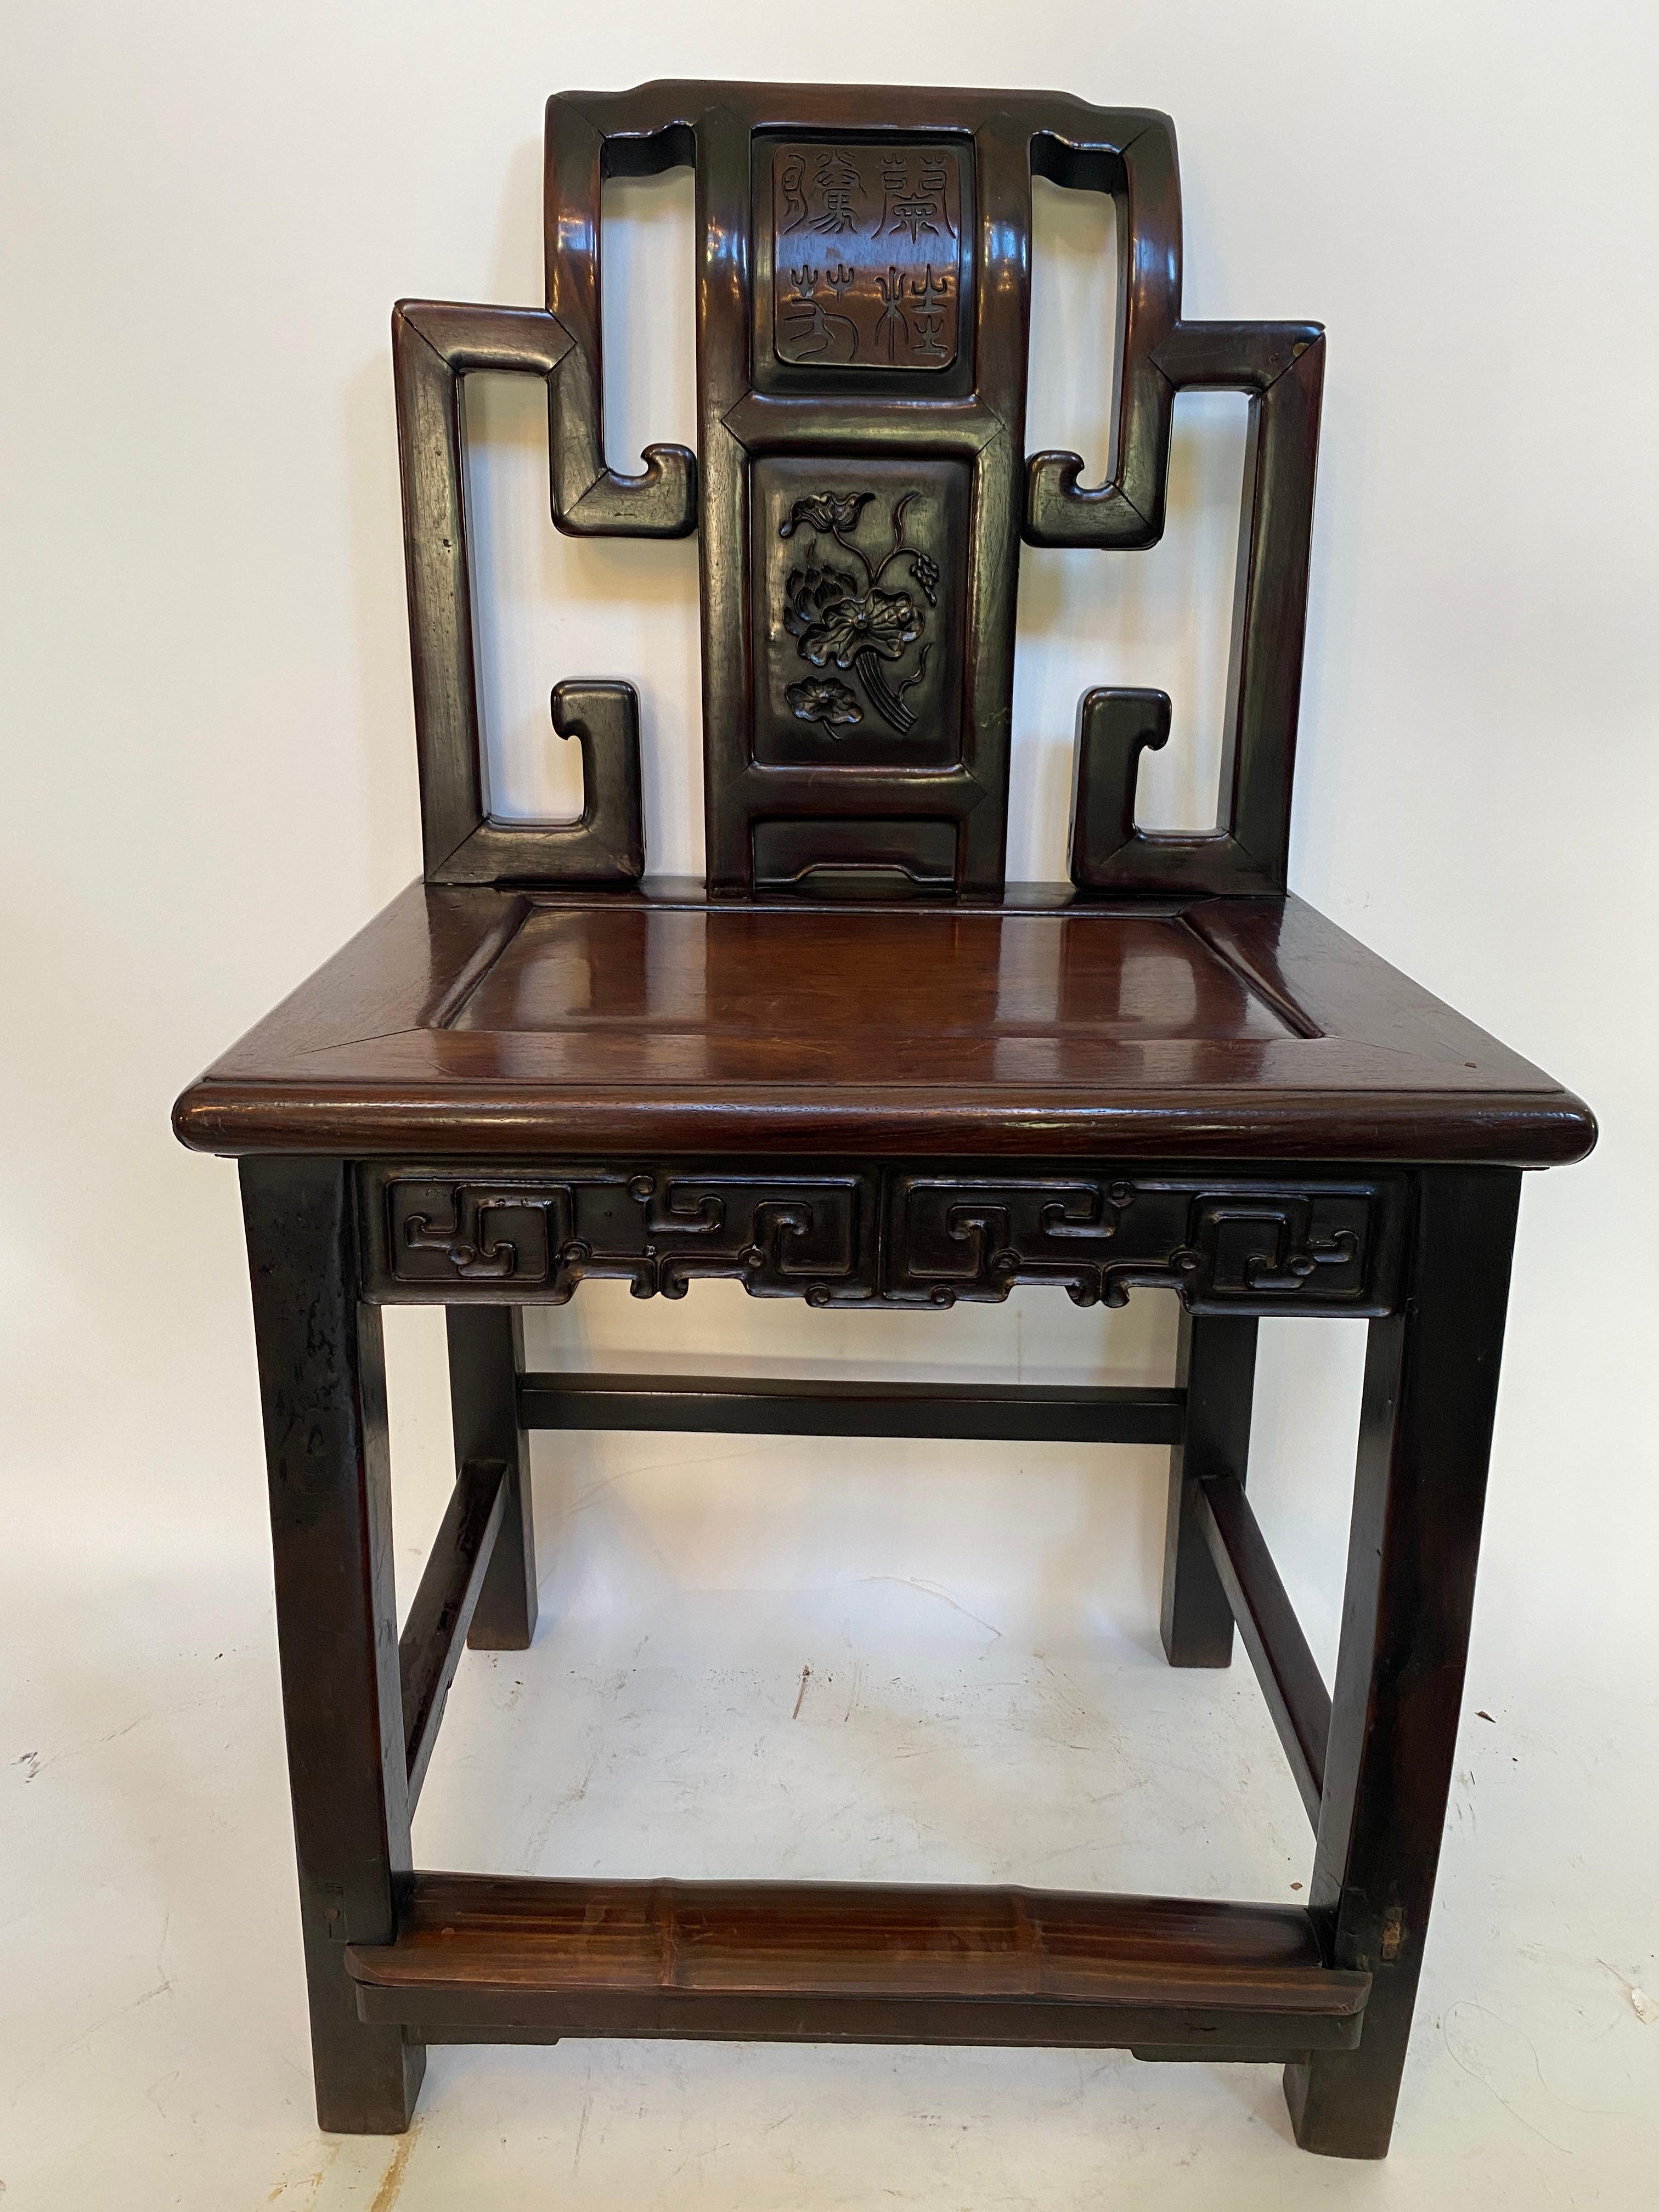 A 19th century antique Chinese heavily carved rosewood chair with lotus, rosewood apron with
design, see more pictures. Measures: 37.5